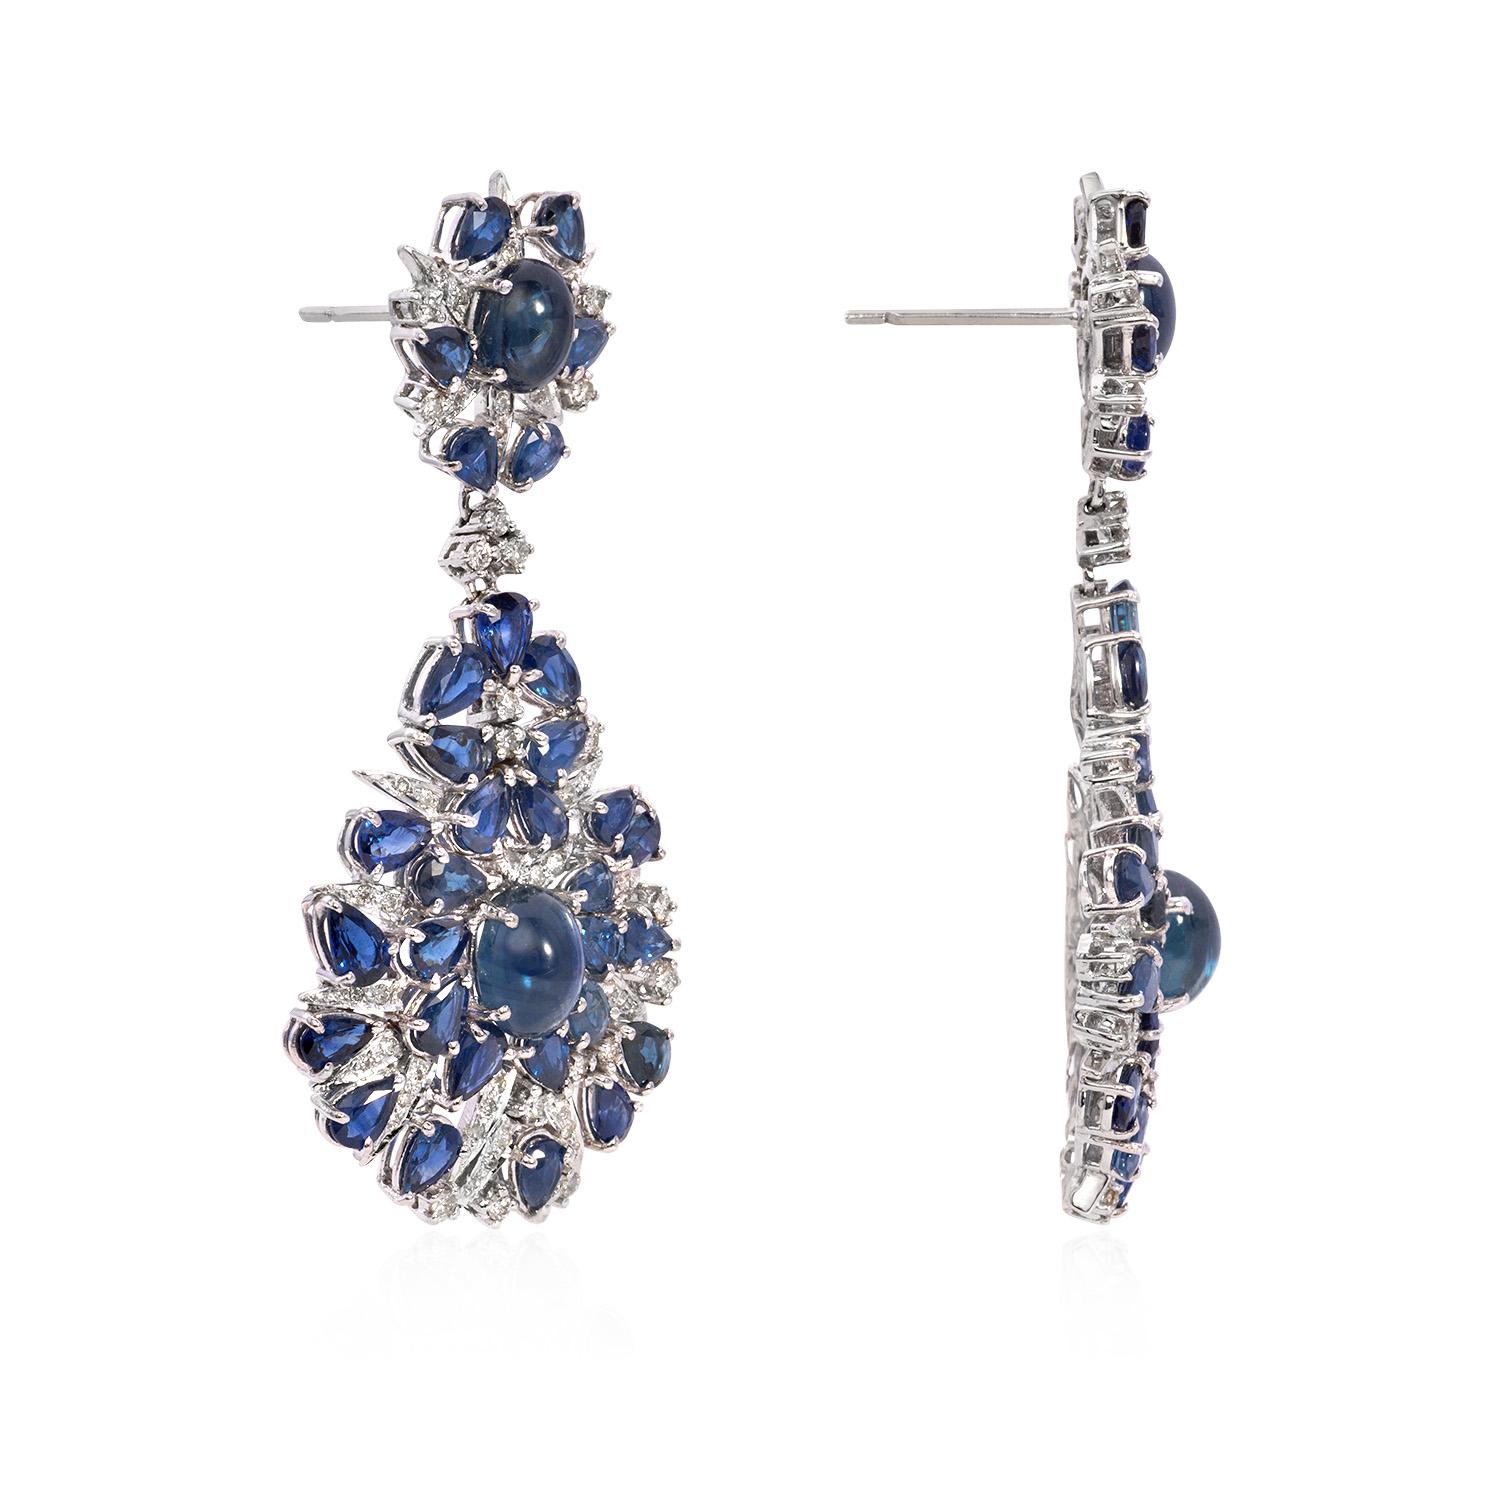 Introducing our exquisite Blue Sapphire and Diamond Drop Earrings with Cabs, a stunning pair of earrings that combines the timeless allure of natural blue sapphires with the brilliance of diamonds, all elegantly set in luxurious 18K gold weighing